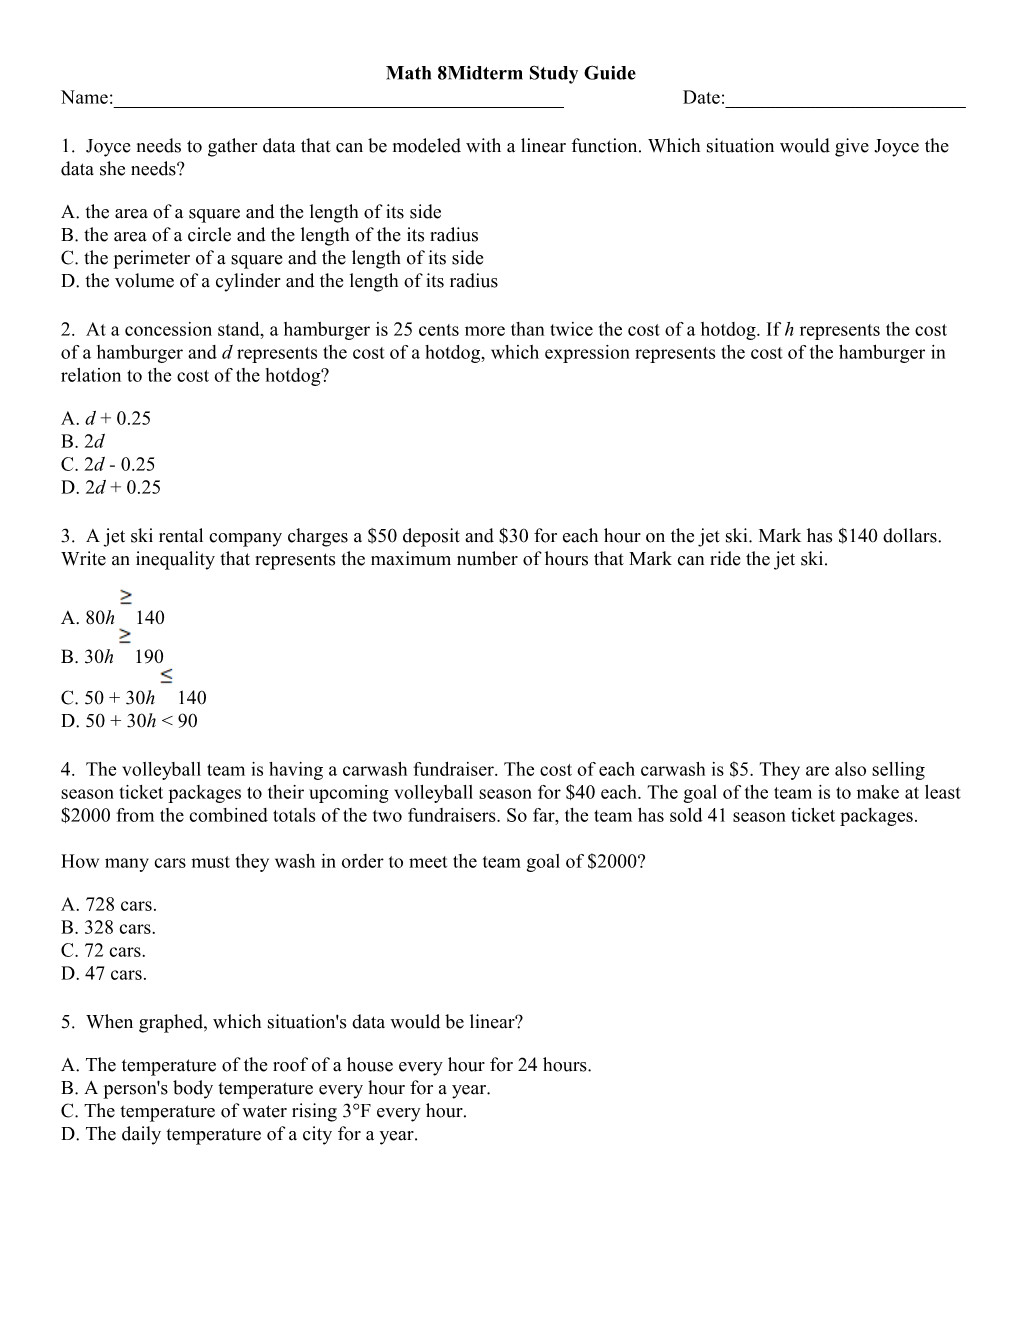 Math8midterm Study Guide